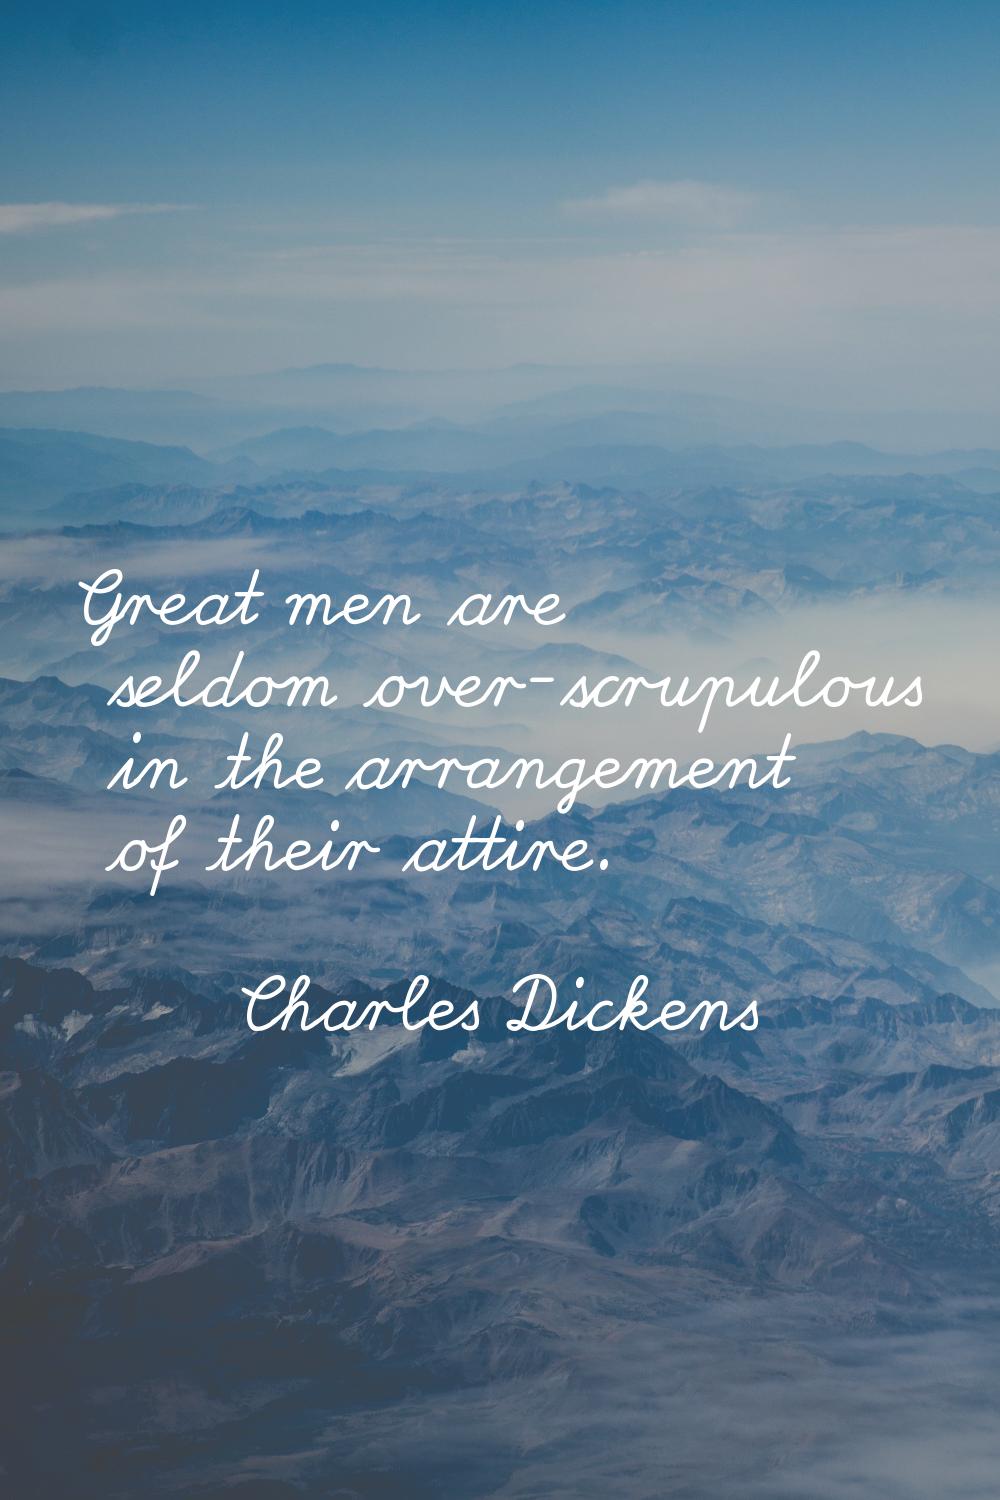 Great men are seldom over-scrupulous in the arrangement of their attire.